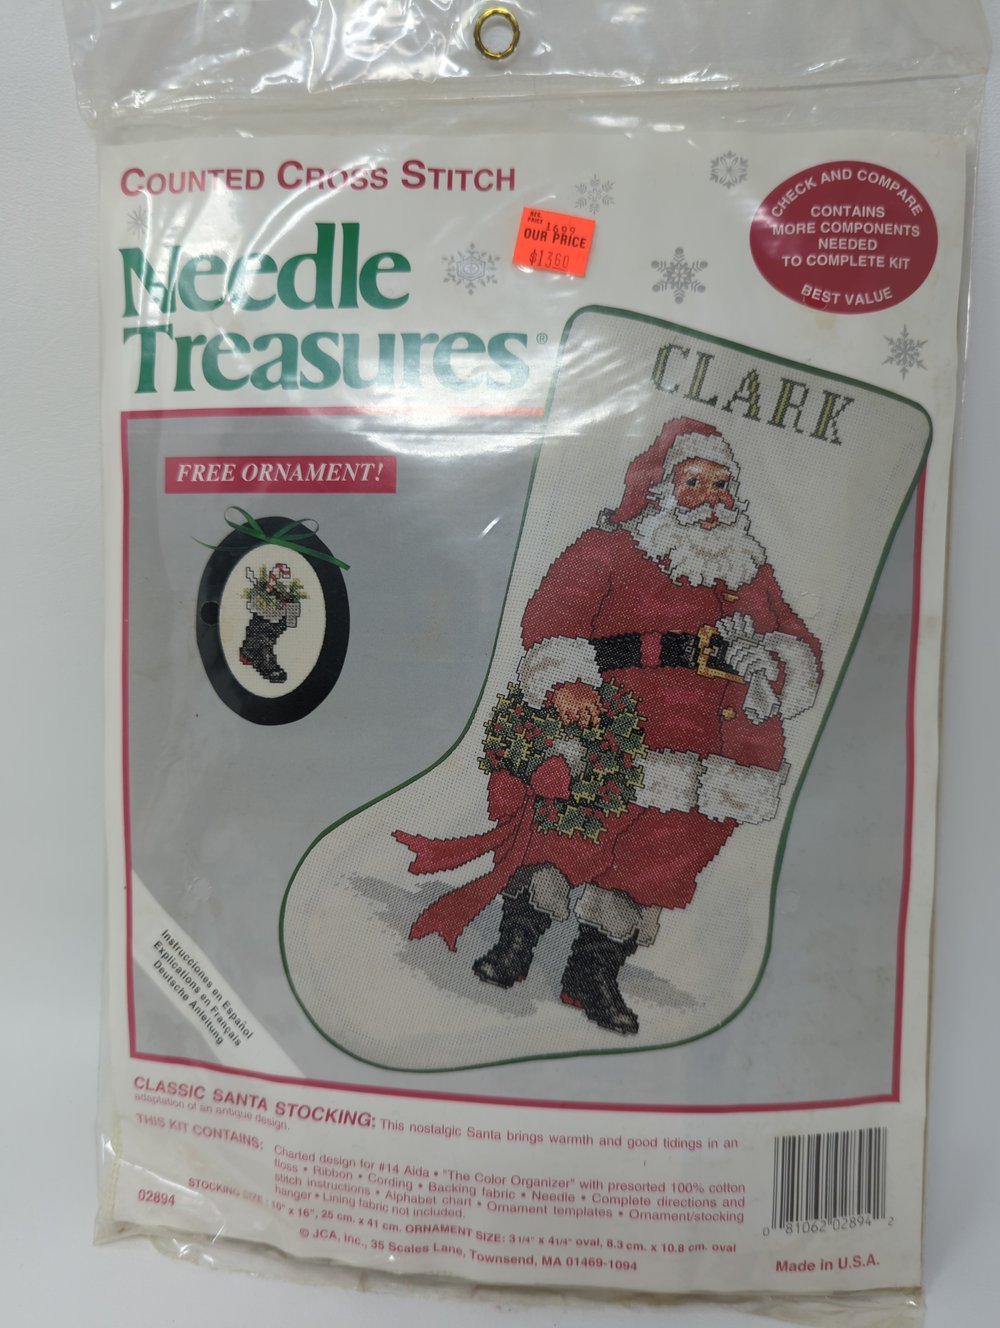 Sleigh Bell Santa counted cross stitch Stocking Kit, Needle Treasures,  Sealed